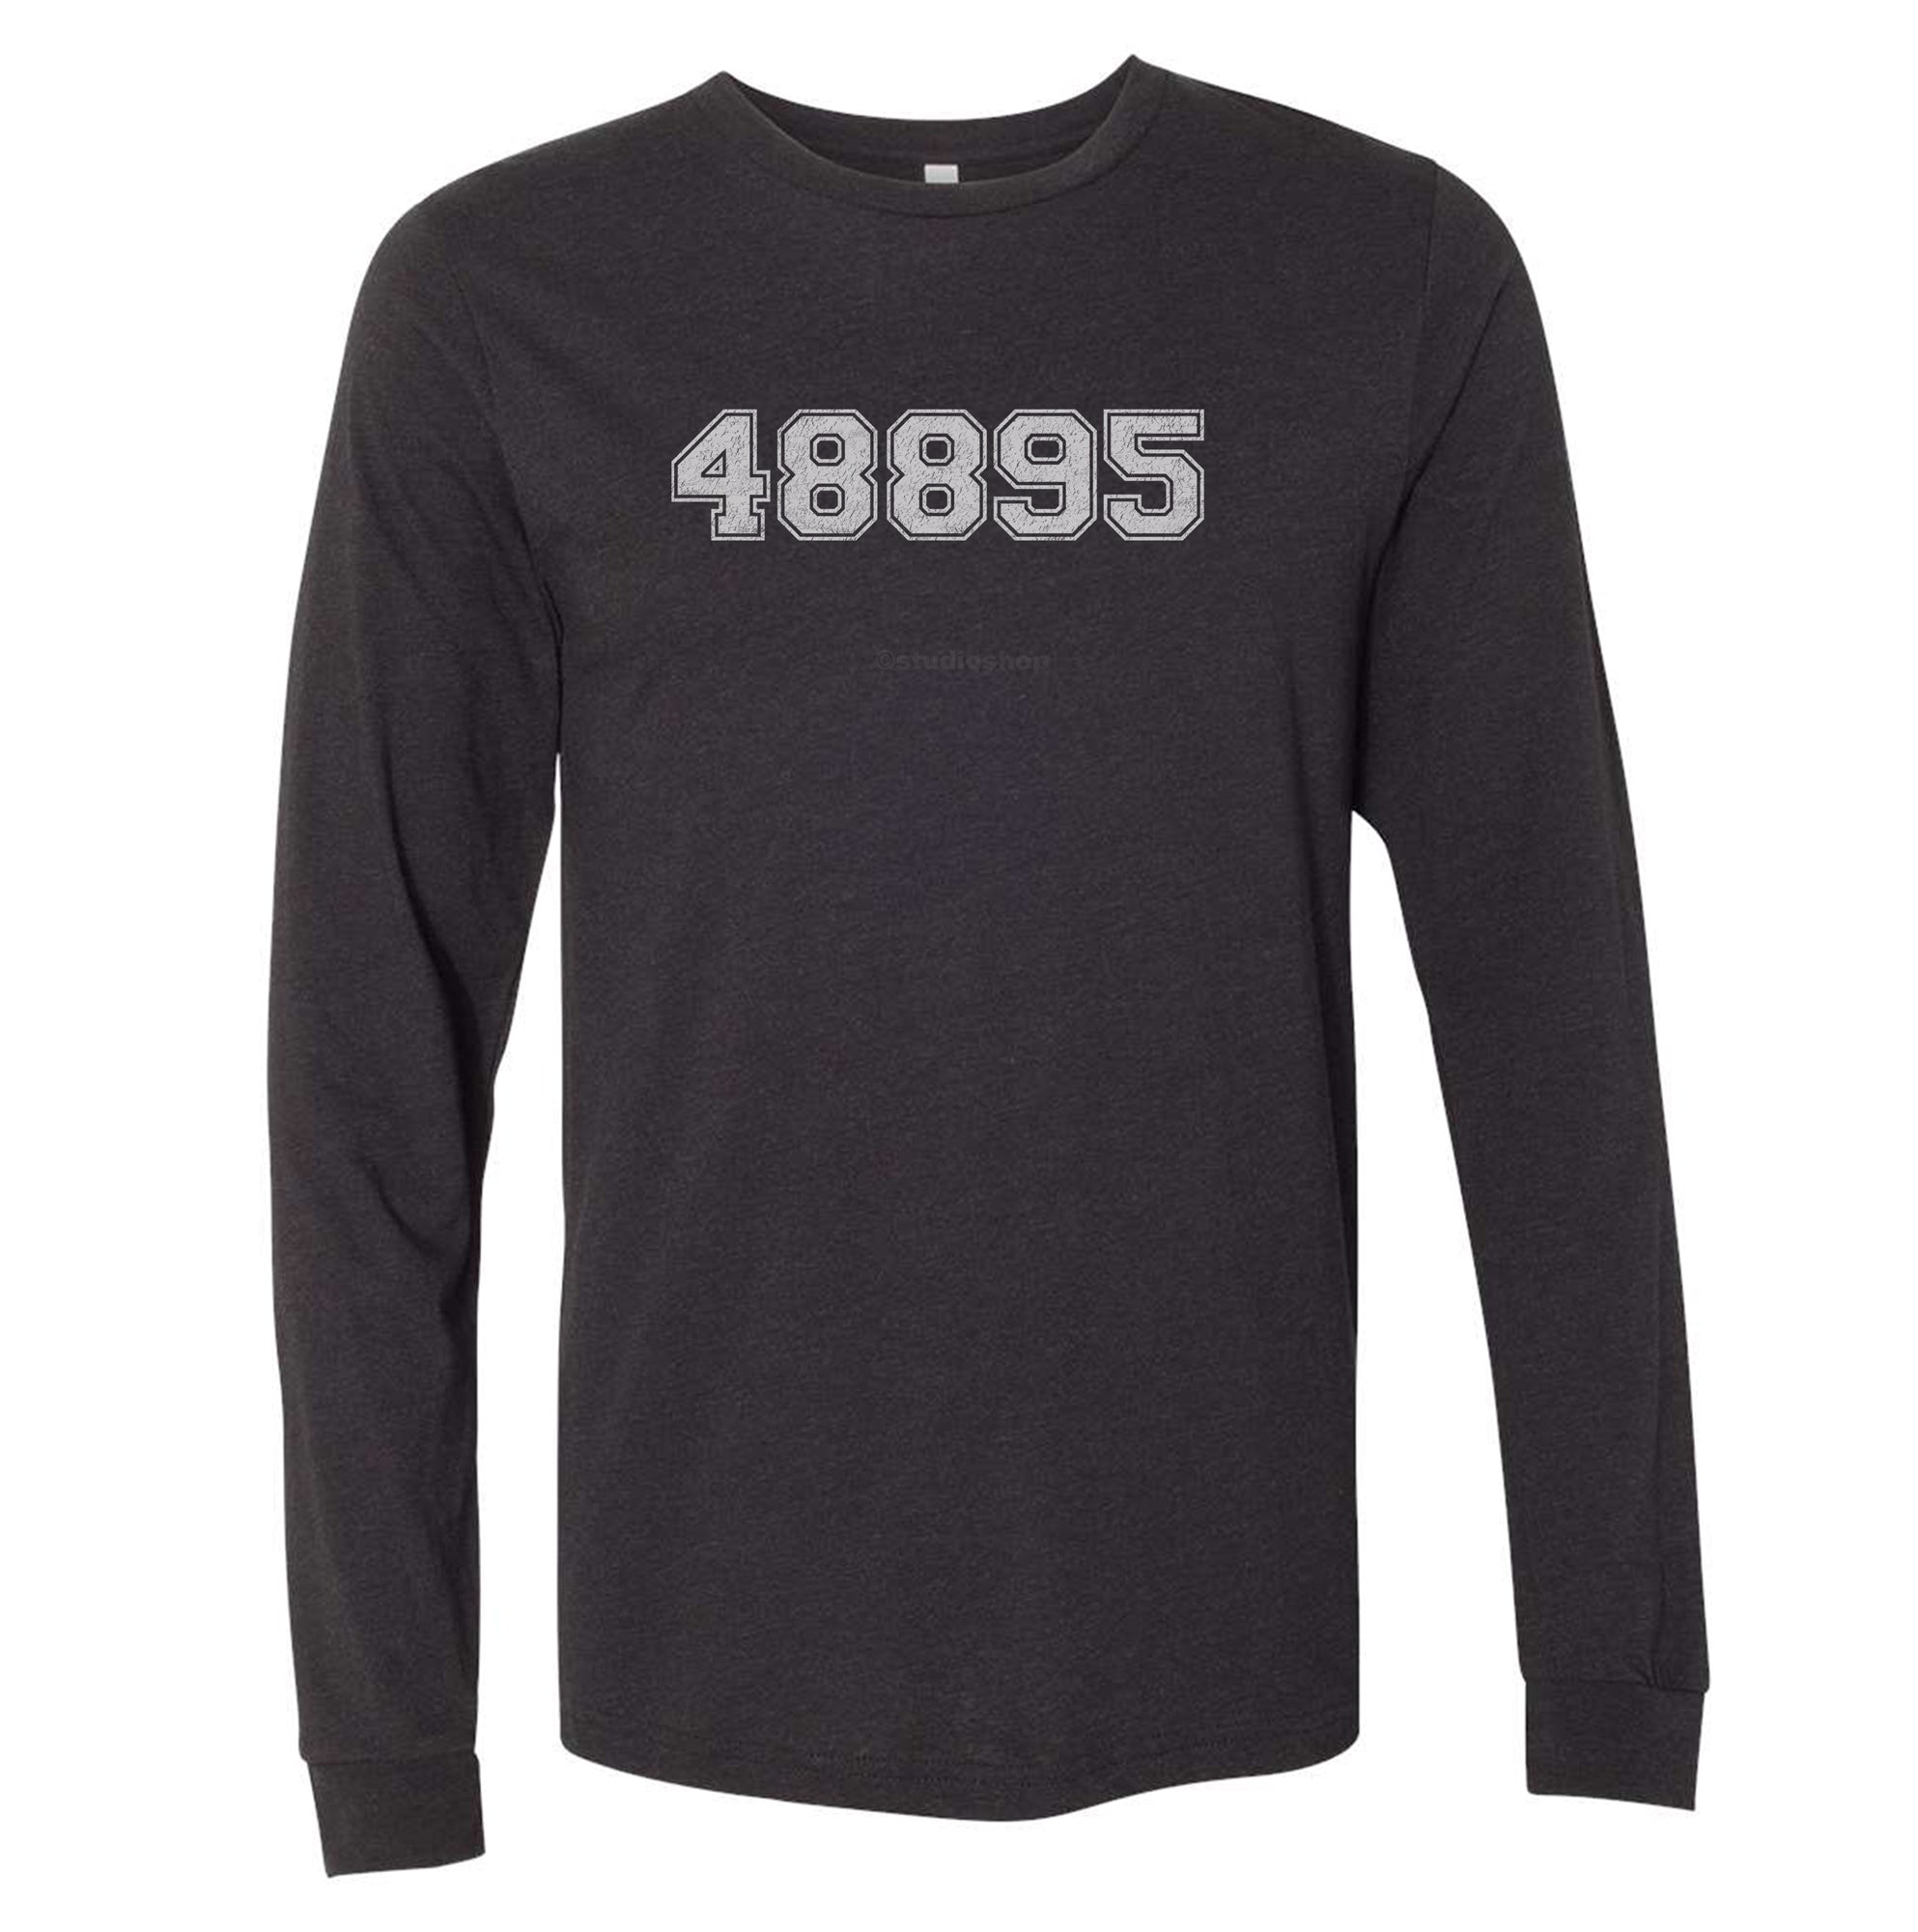 "48895" - Vintage - Blended Youth Long Sleeve